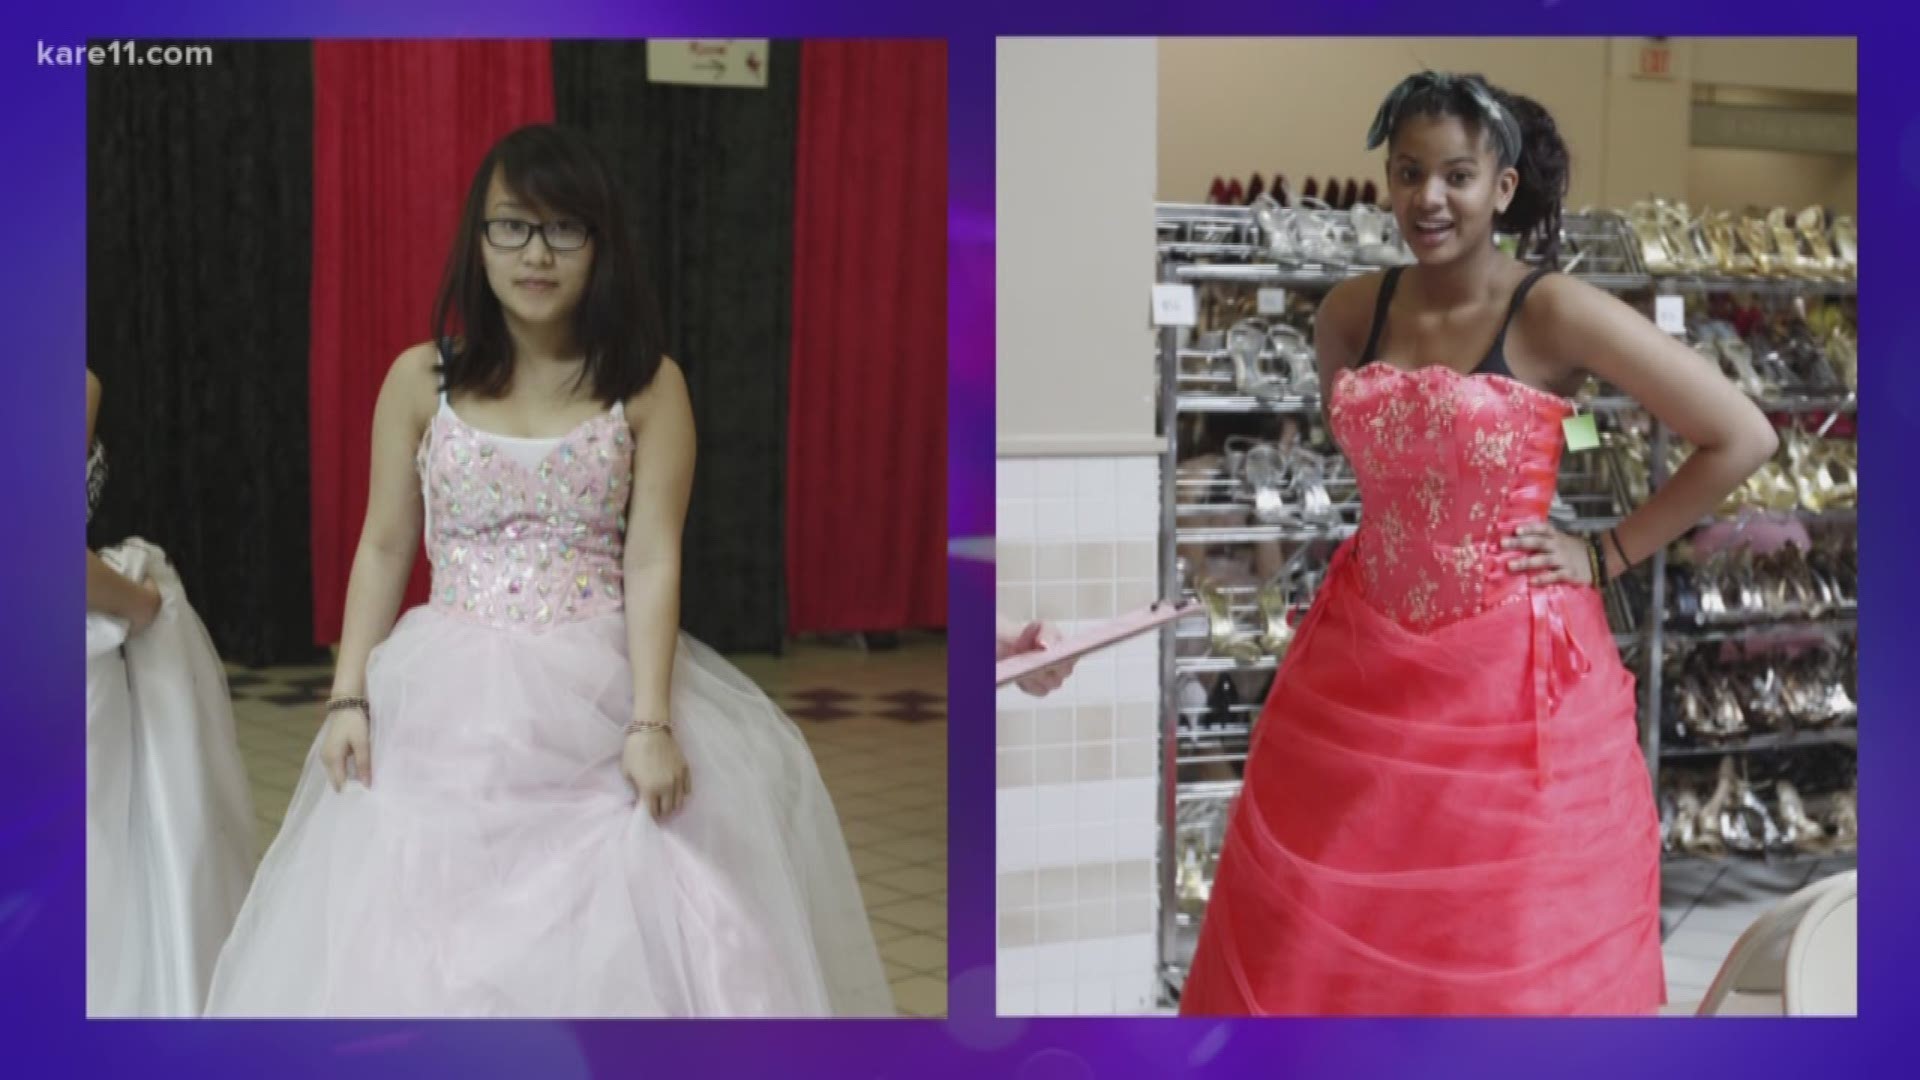 Operation Glass Slipper will host its final Princess Event in March to outfit 1,500 local deserving high school girls with new and gently used prom dresses and accessories. https://kare11.tv/2Nkllmh